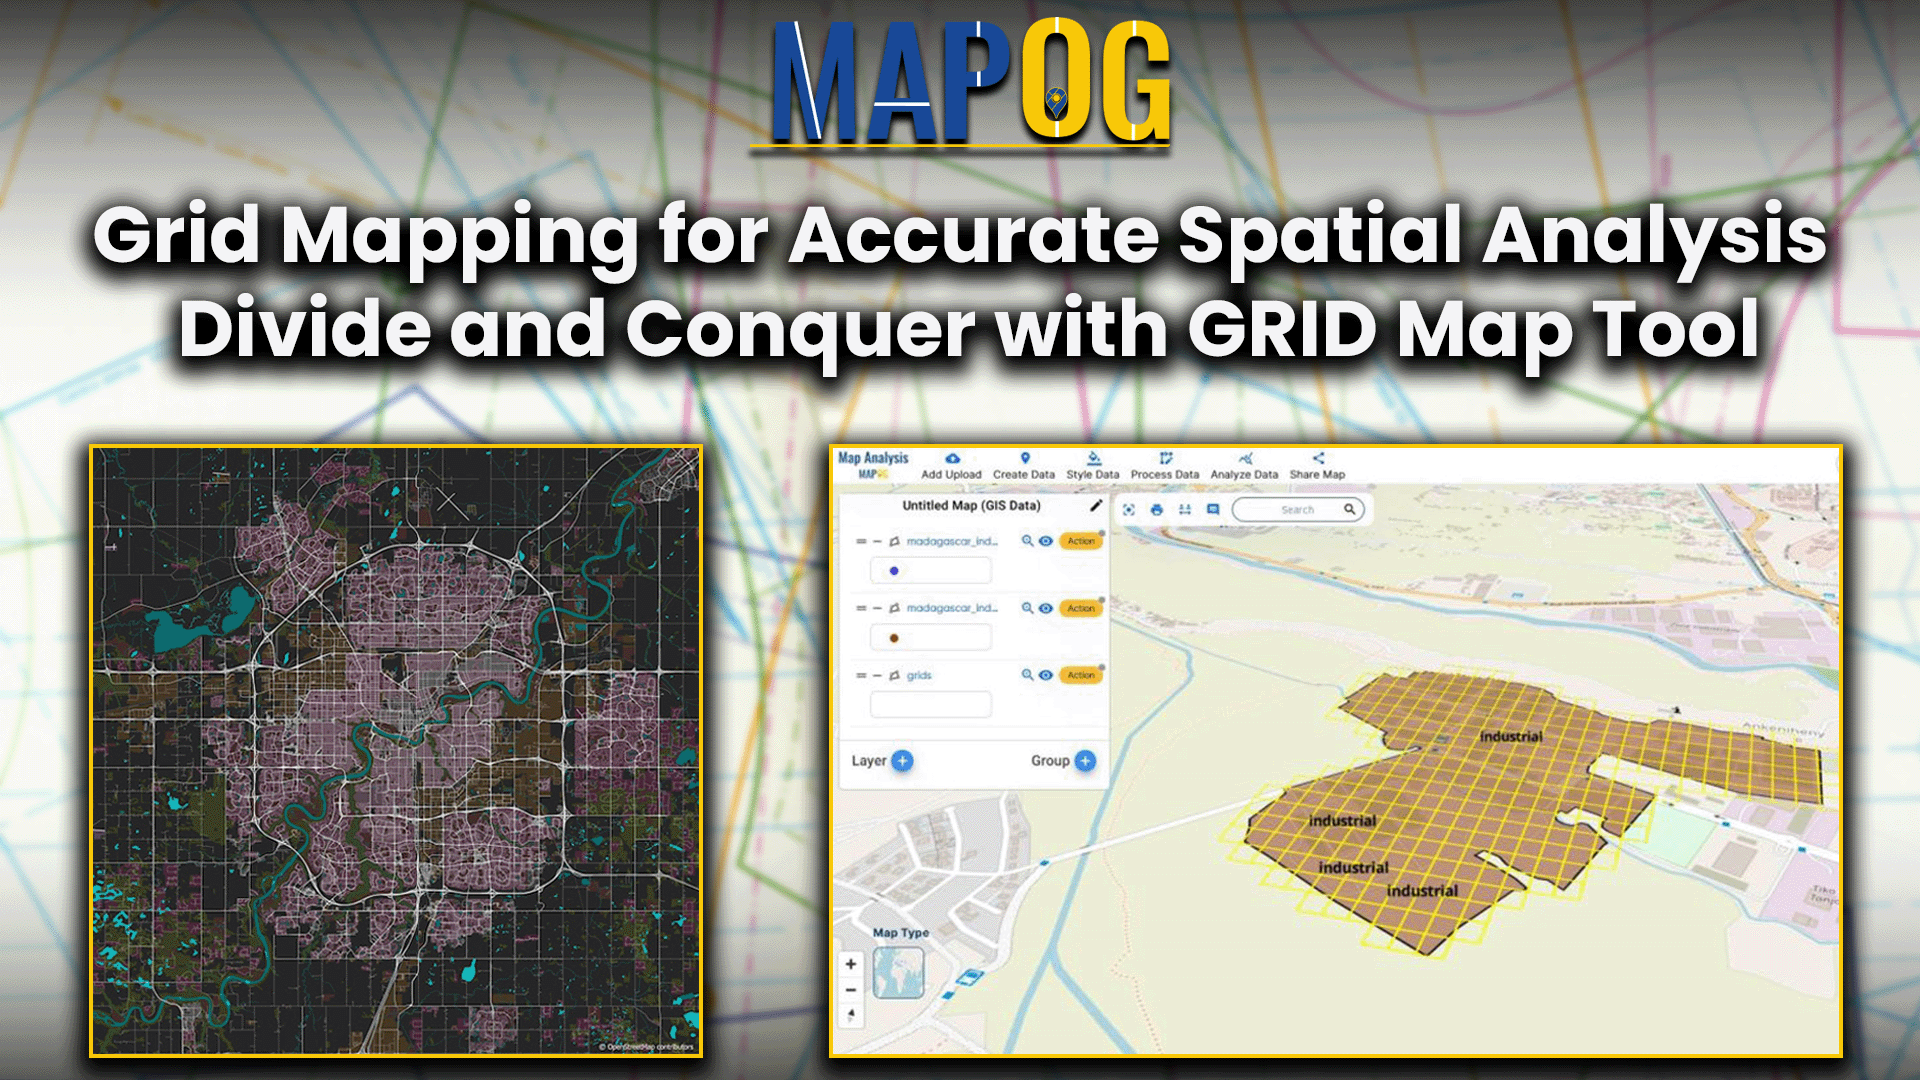 Grid Mapping for Accurate Spatial Analysis: Divide and Conquer with GRID Map Tool